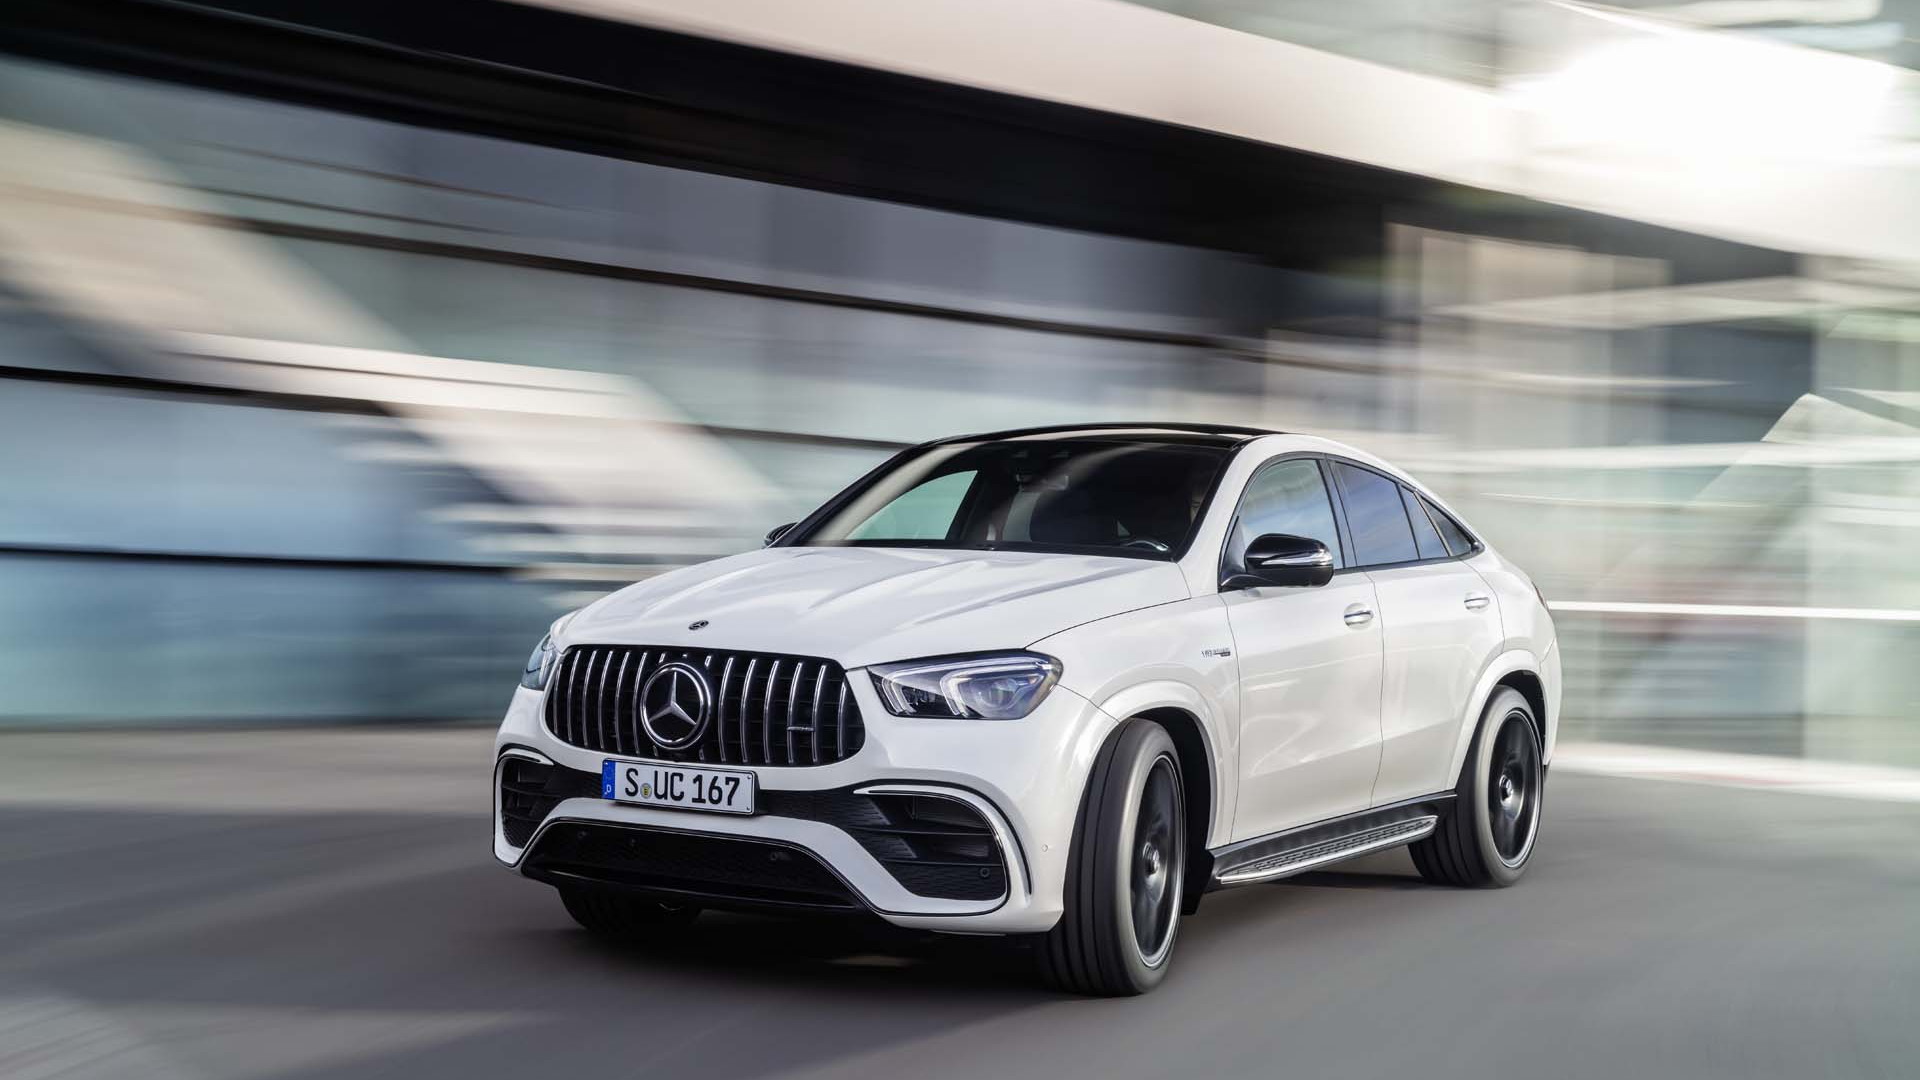 2021 Mercedes-AMG GLE63 S Coupe